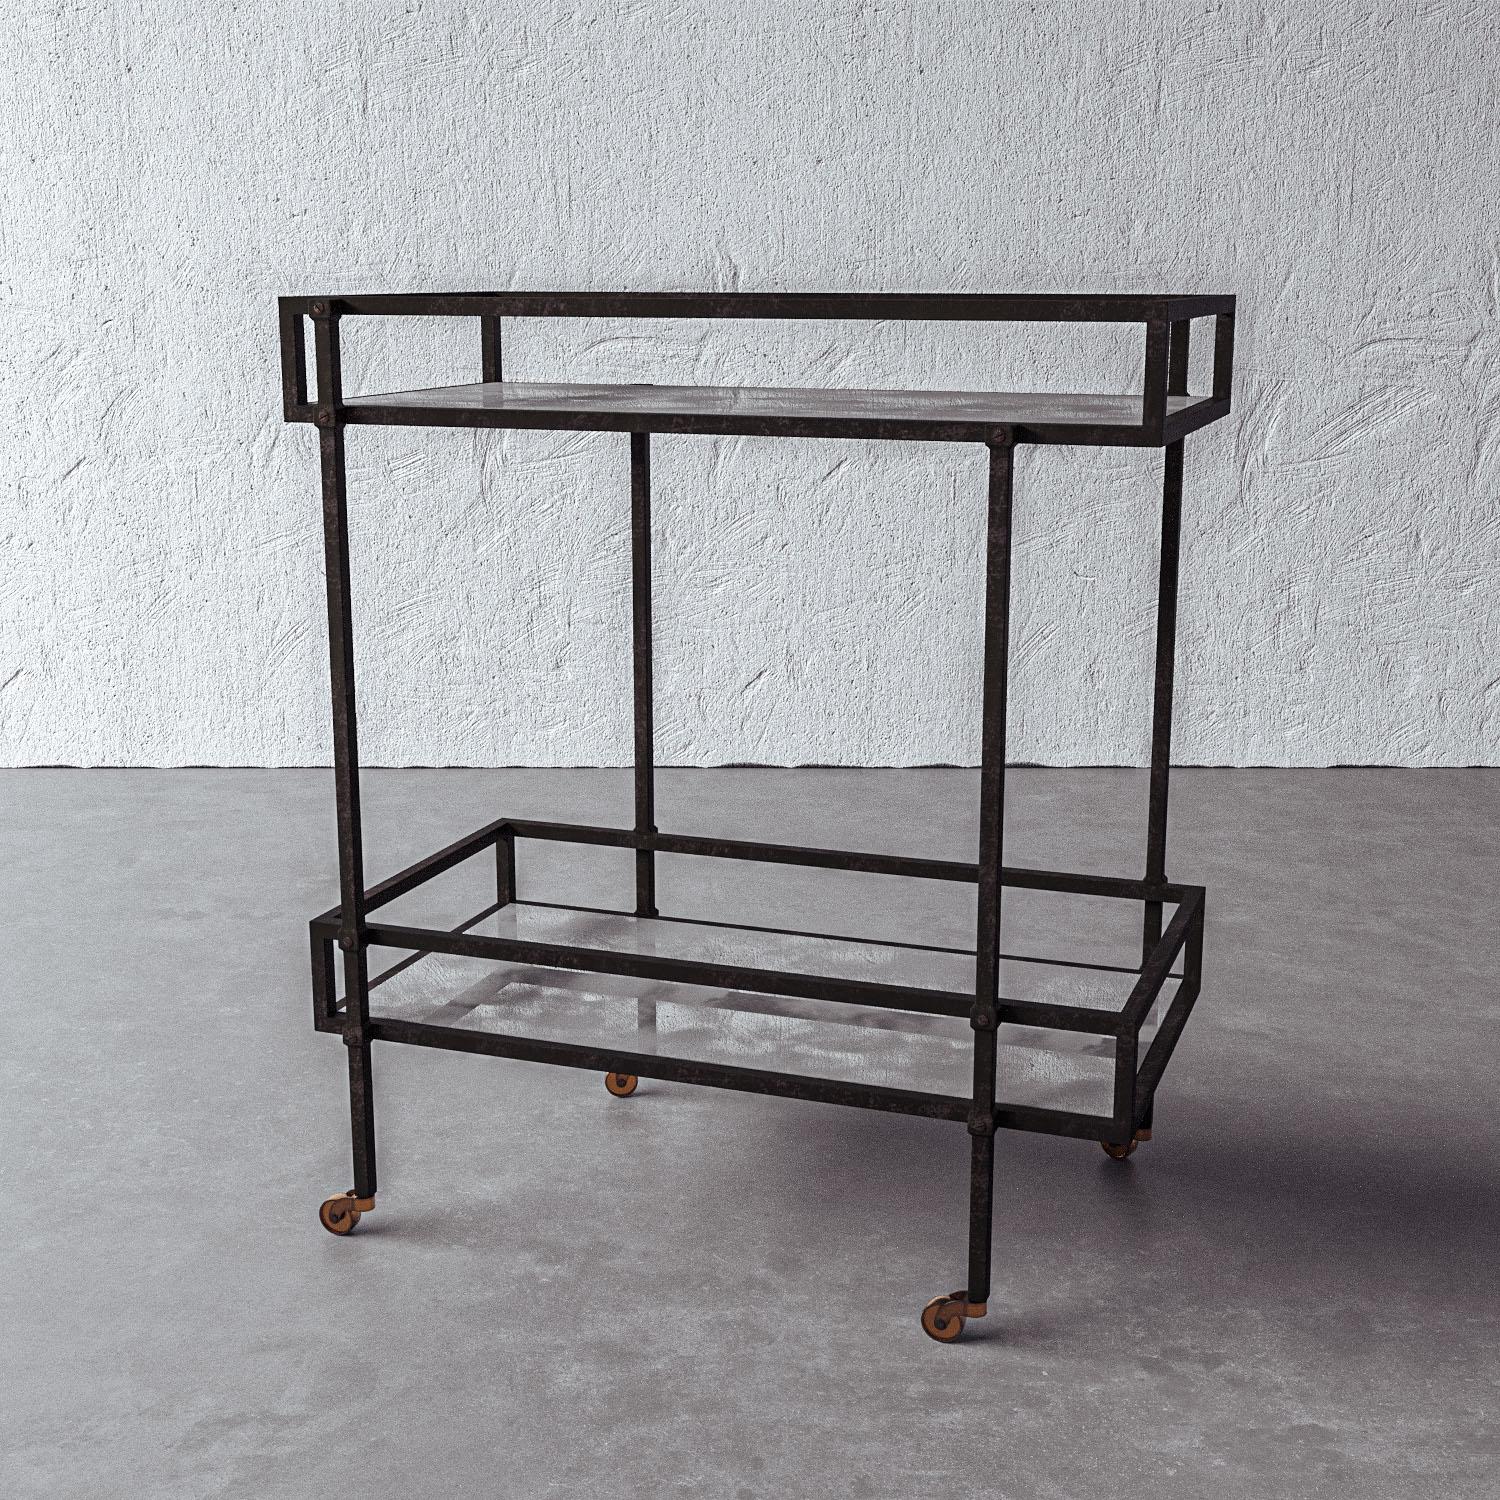 Antique mirror and hammered bronze patinated metal form a bar cart inspired by French design in the 1940s. Complete with brass casters for movement and handmade by artisans in Vietnam, this decorative yet highly functional piece of furniture is